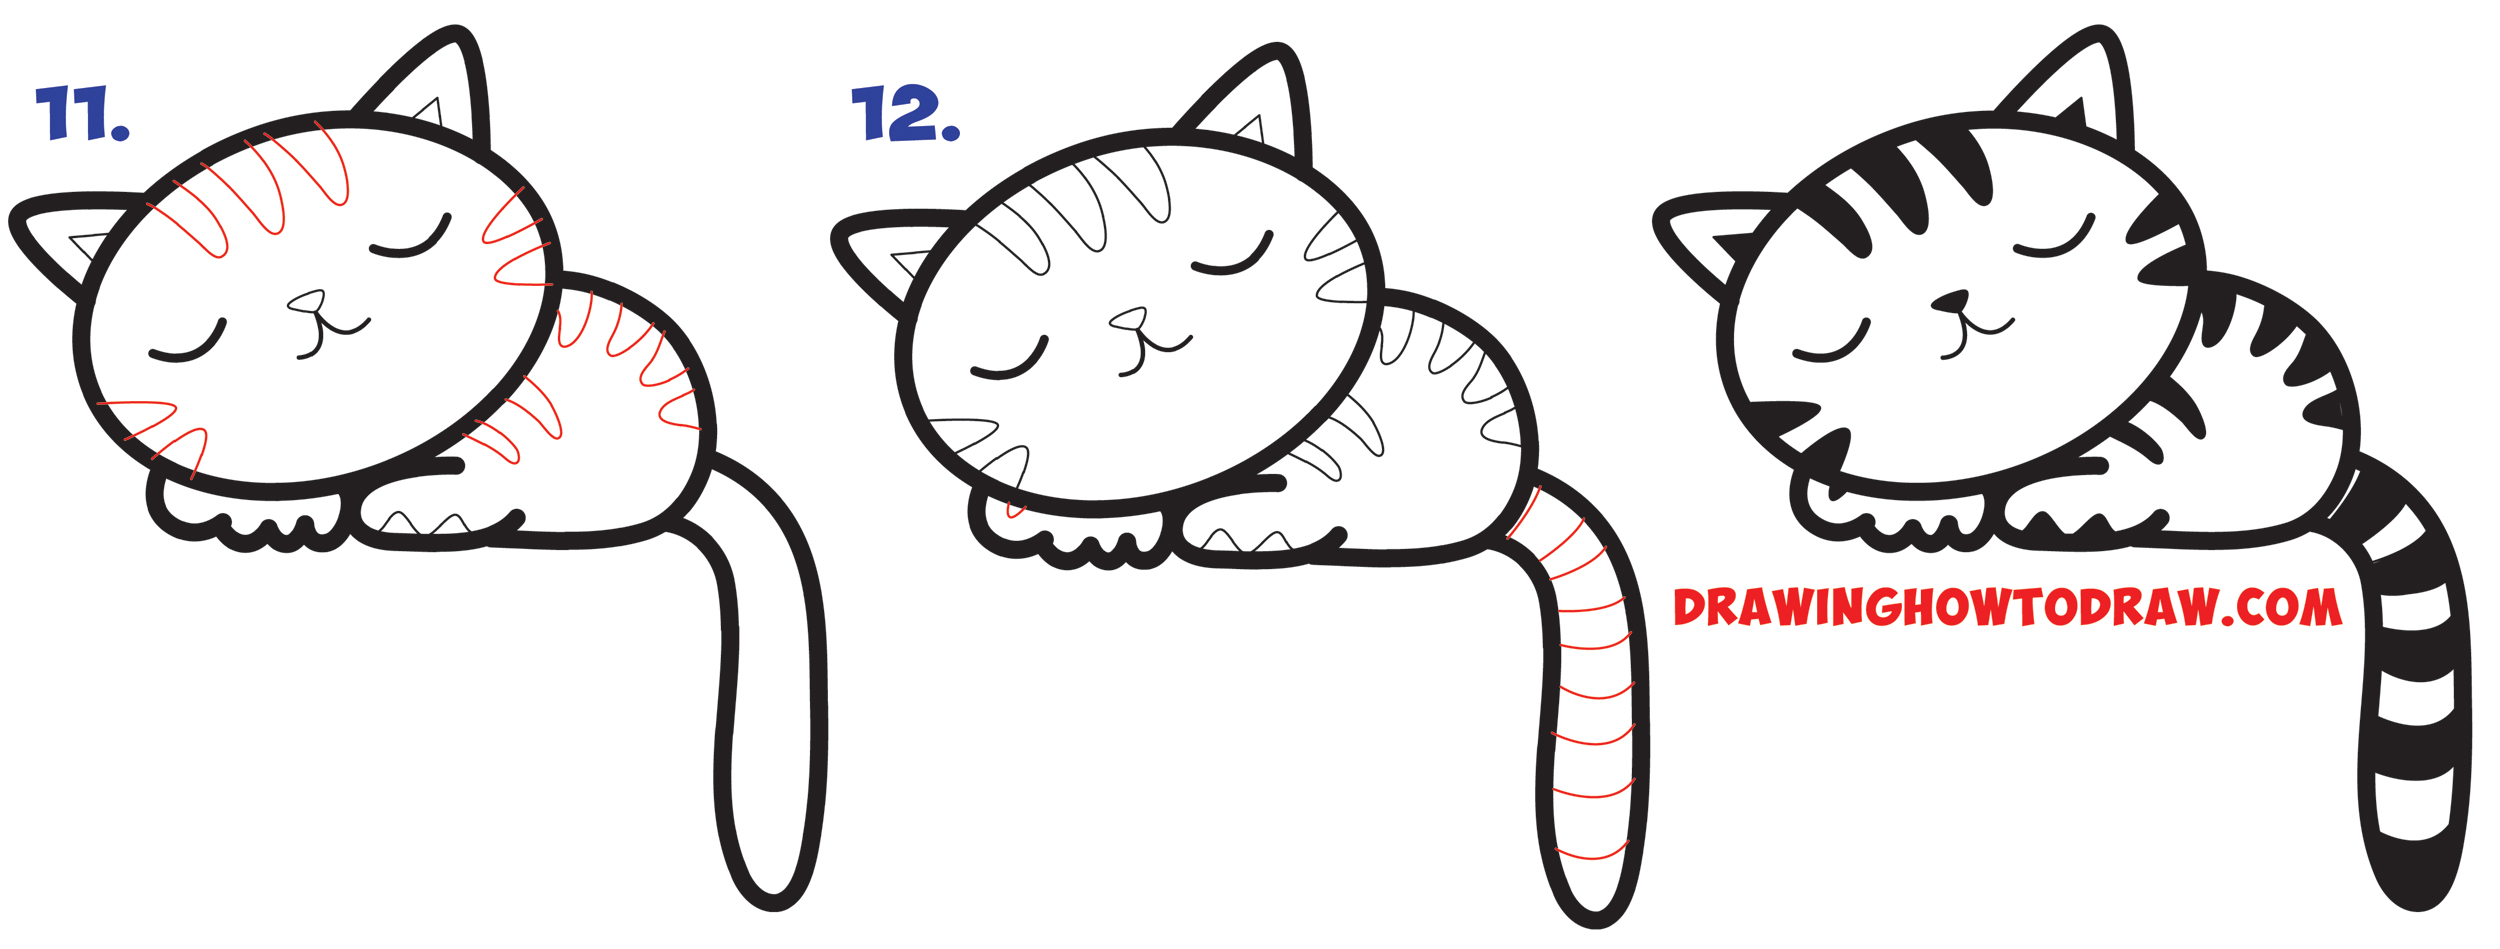 how to draw a cartoon cat easy